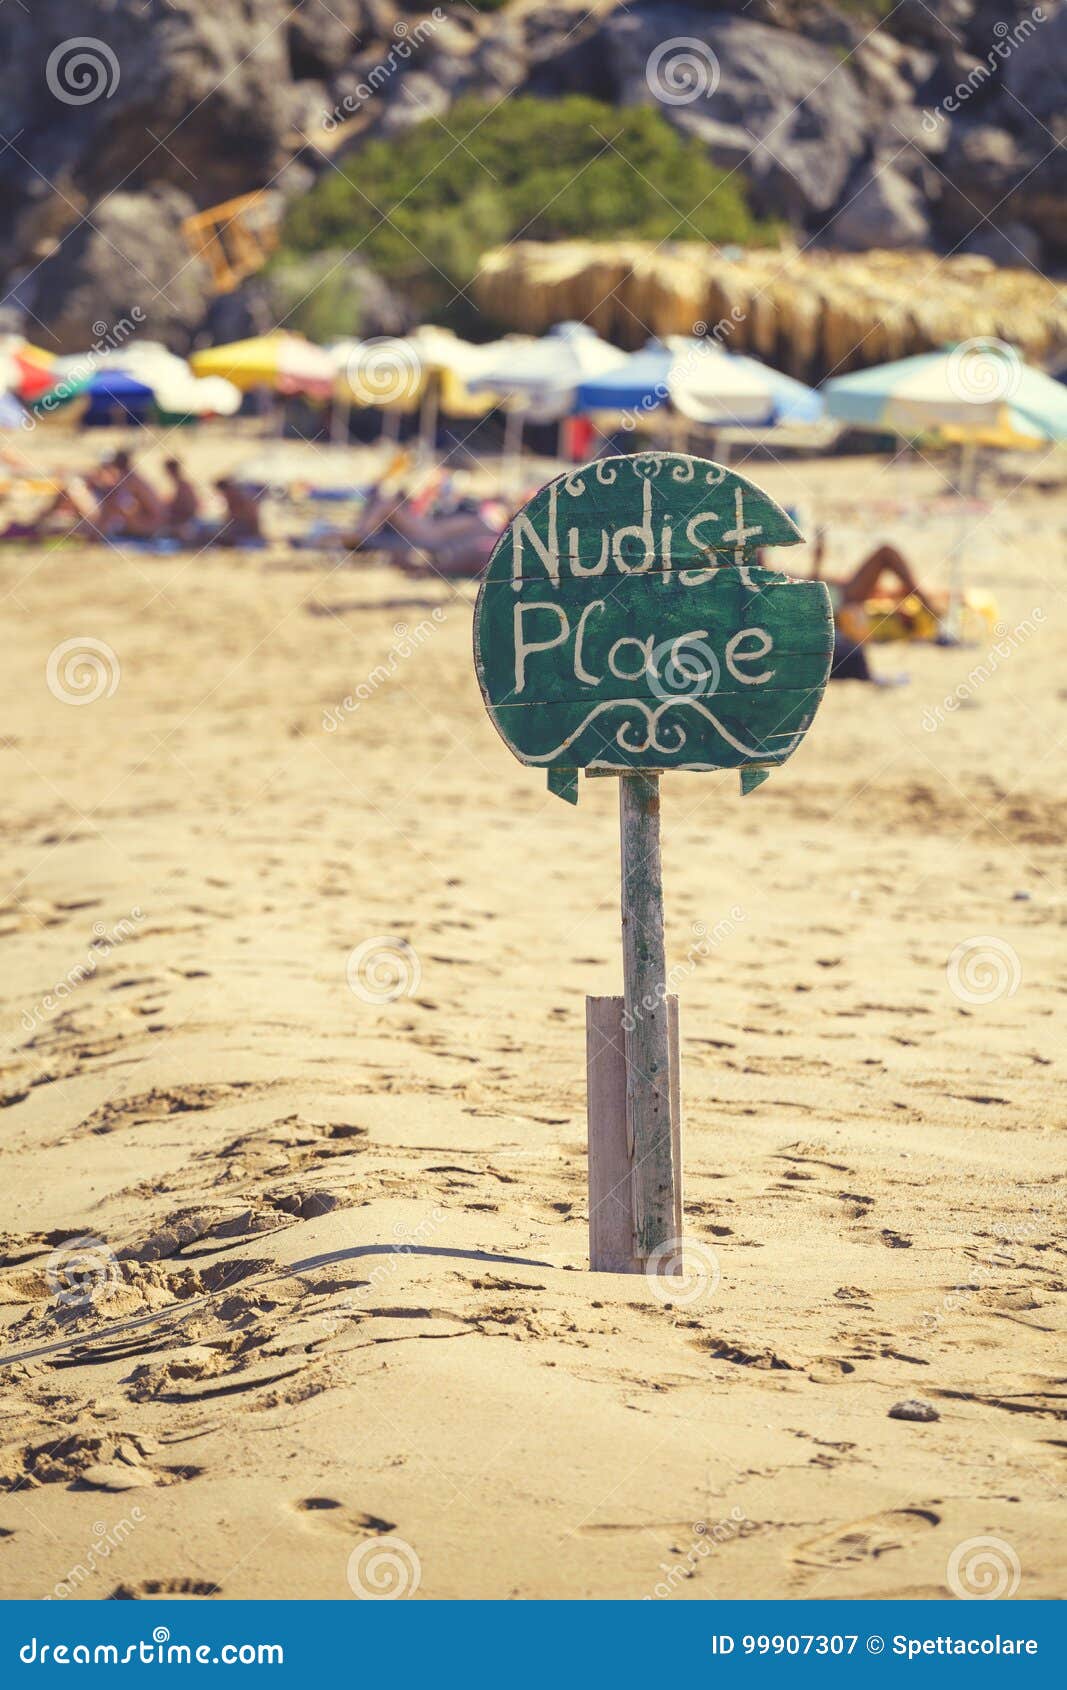 Nudist Place Wooden Sign 3 Stock Photo pic